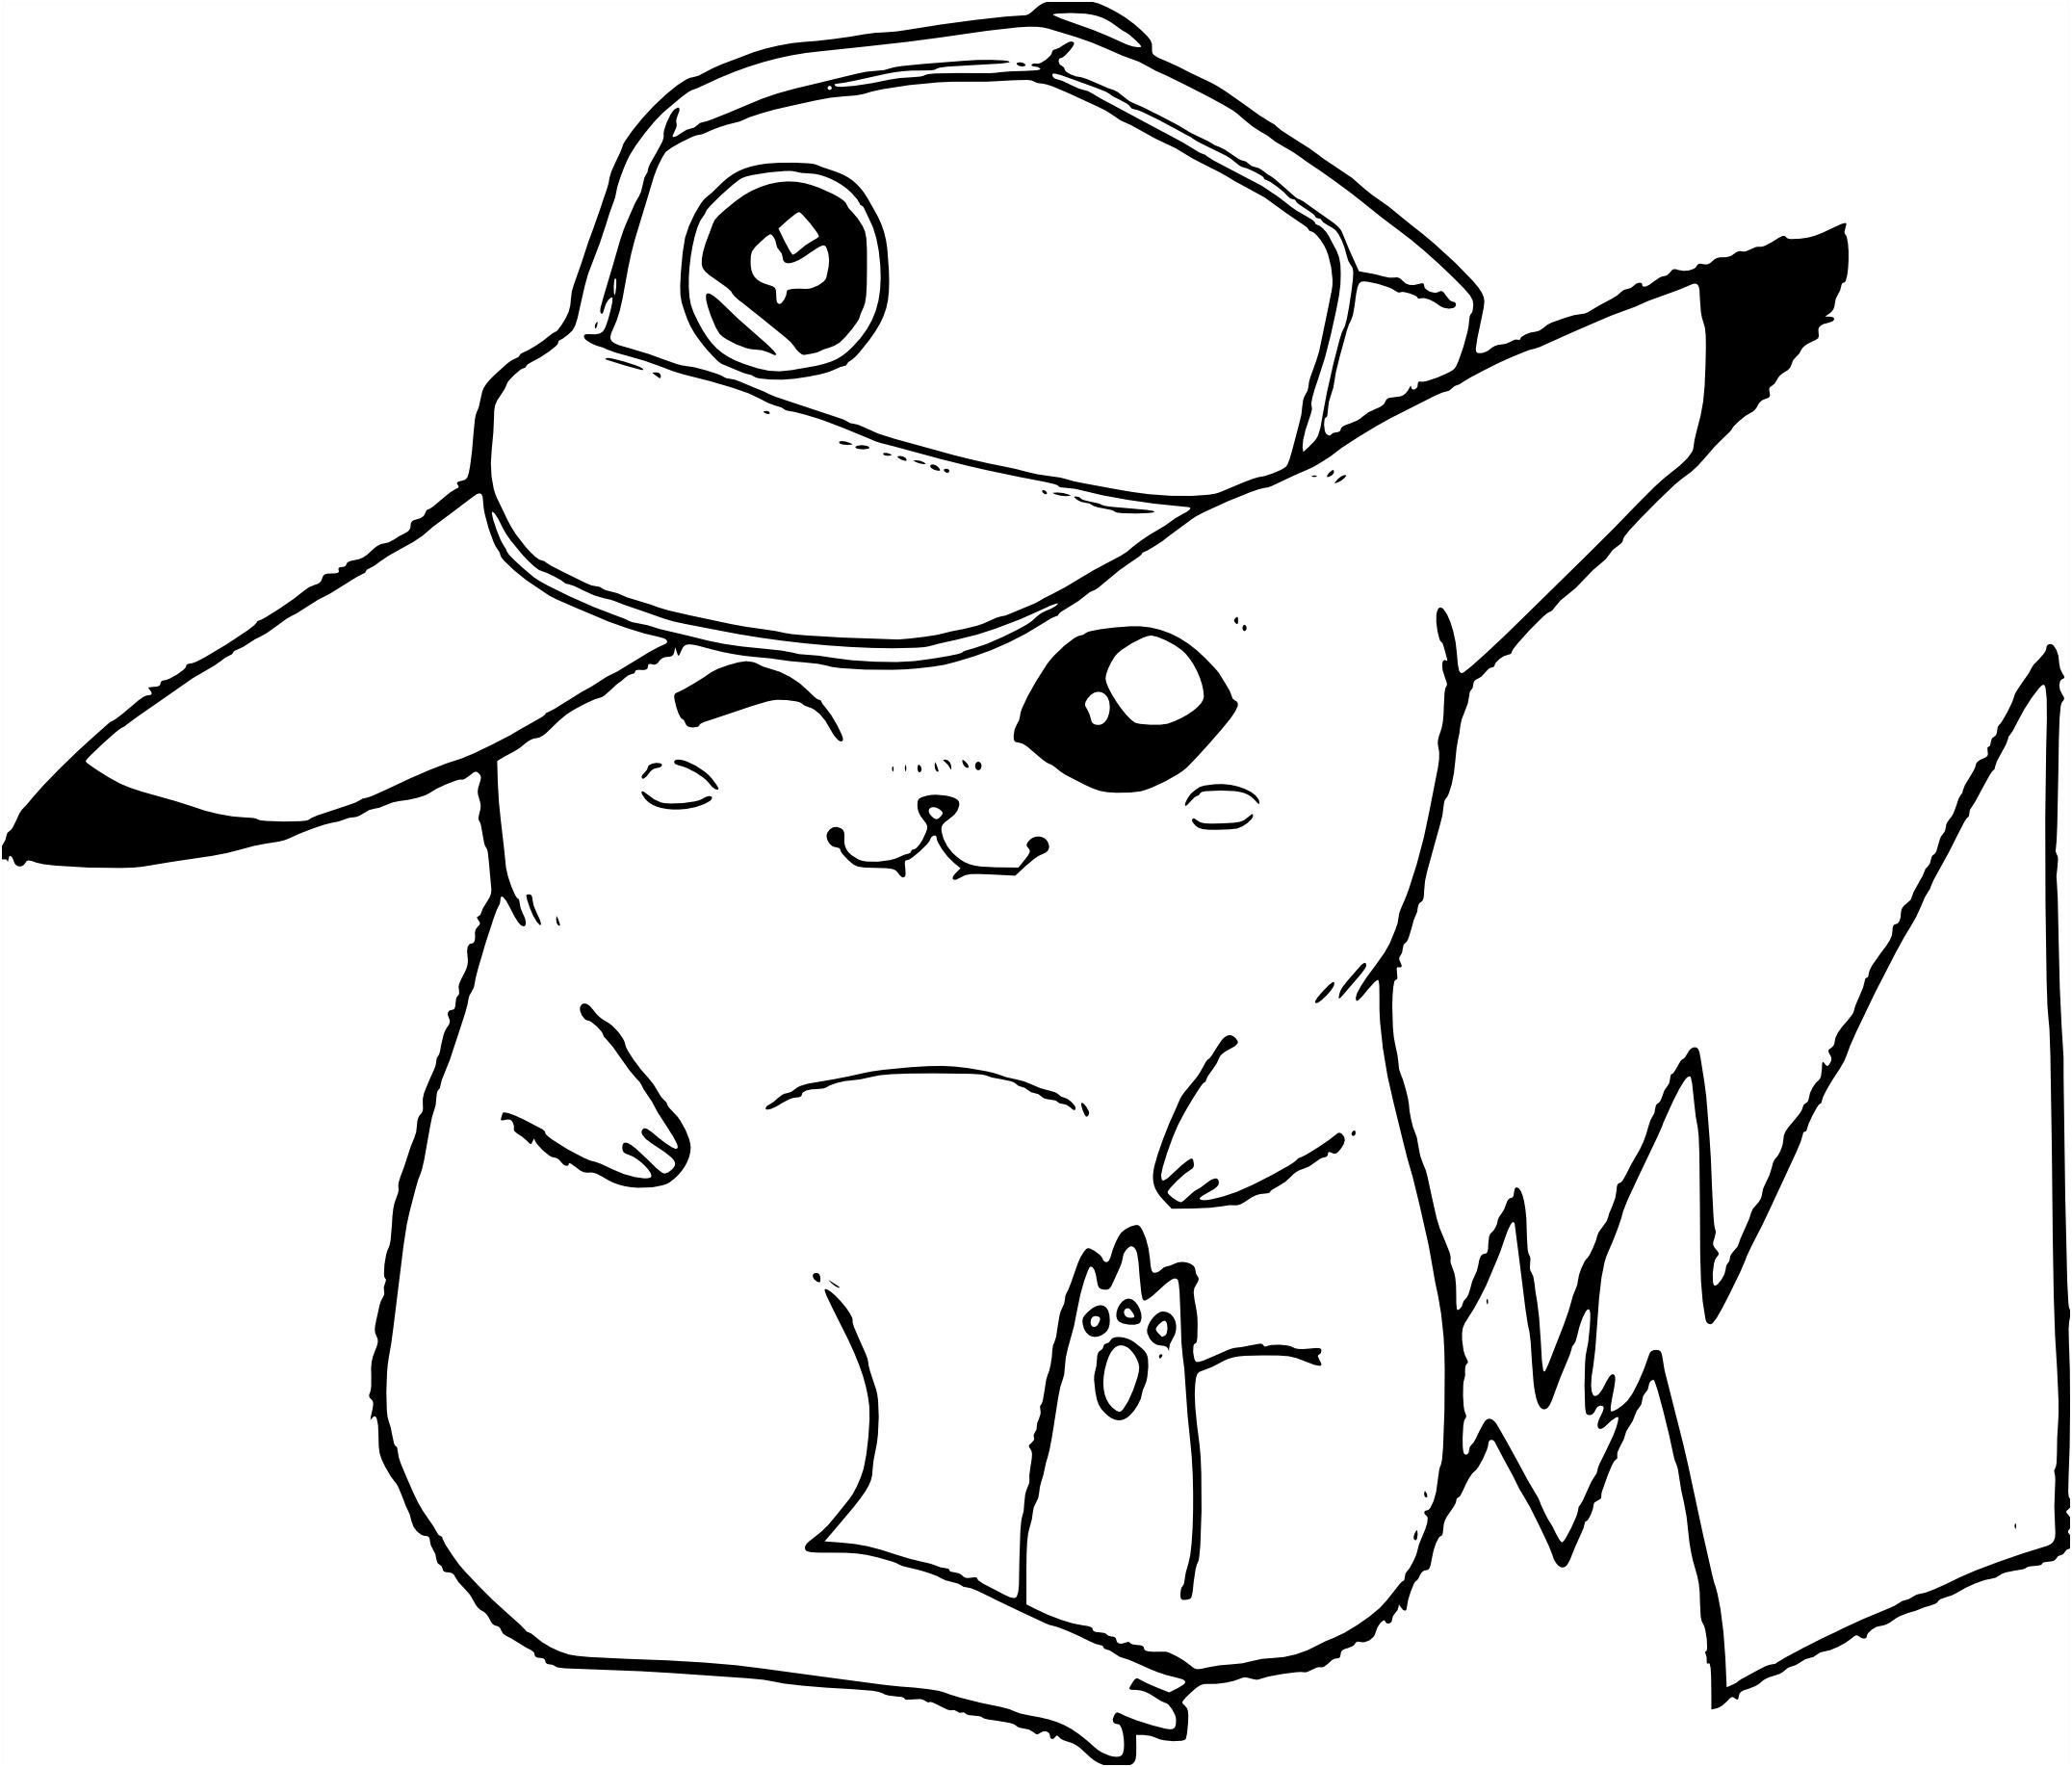 14 Remarquable Coloriage Pikachu Kawaii Pictures | Coloriage Pikachu encequiconcerne Coloriage Pikatchu